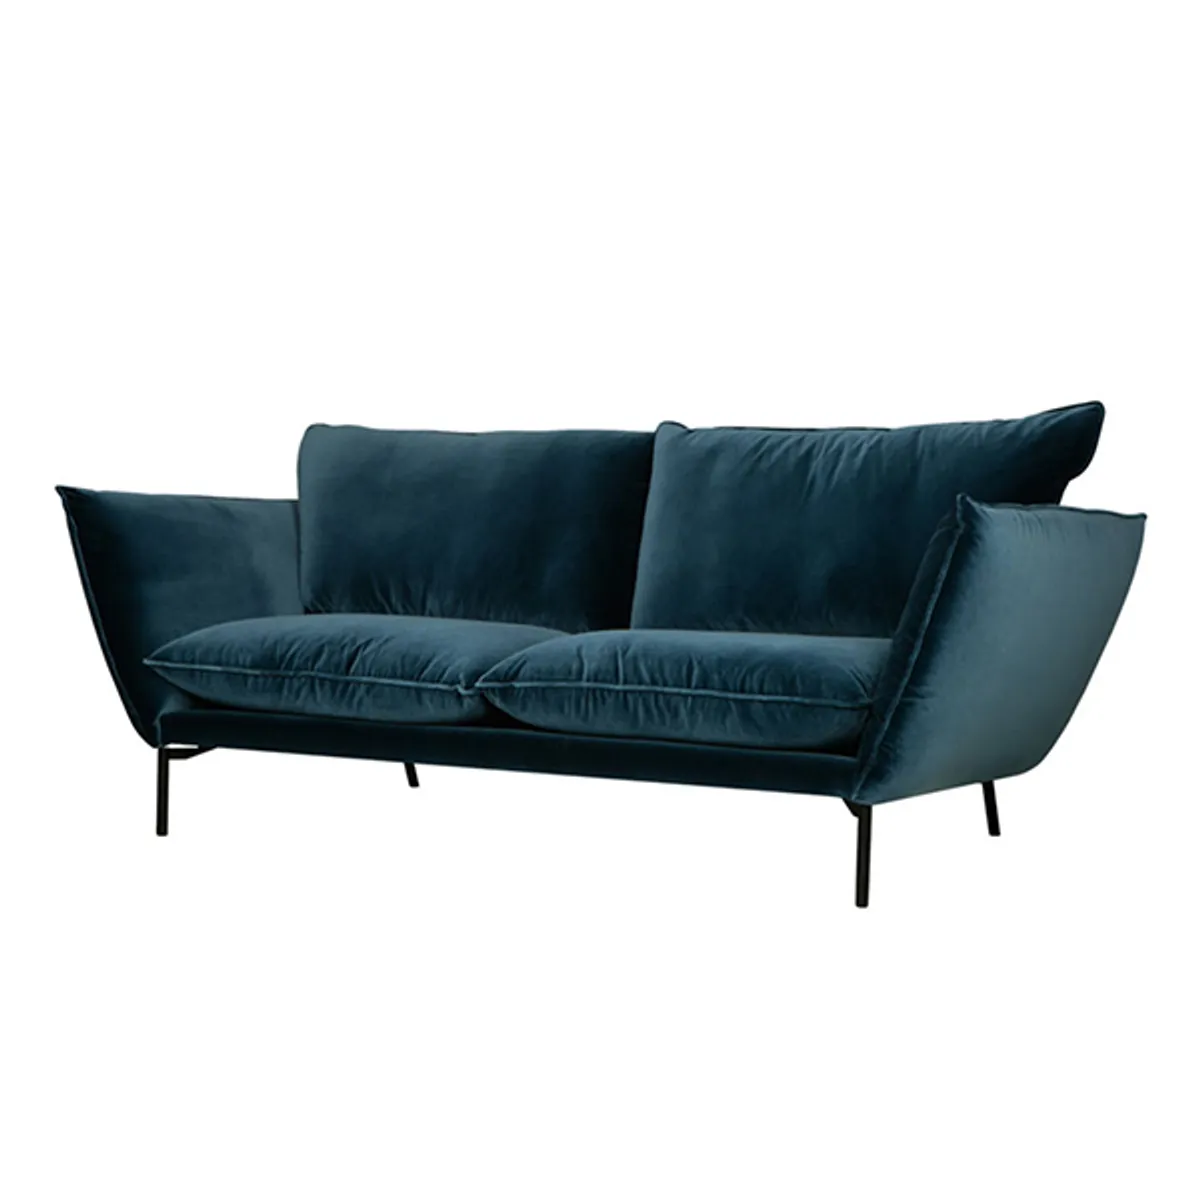 Beagle Sofa Blue Velvet Inside Out Contracts